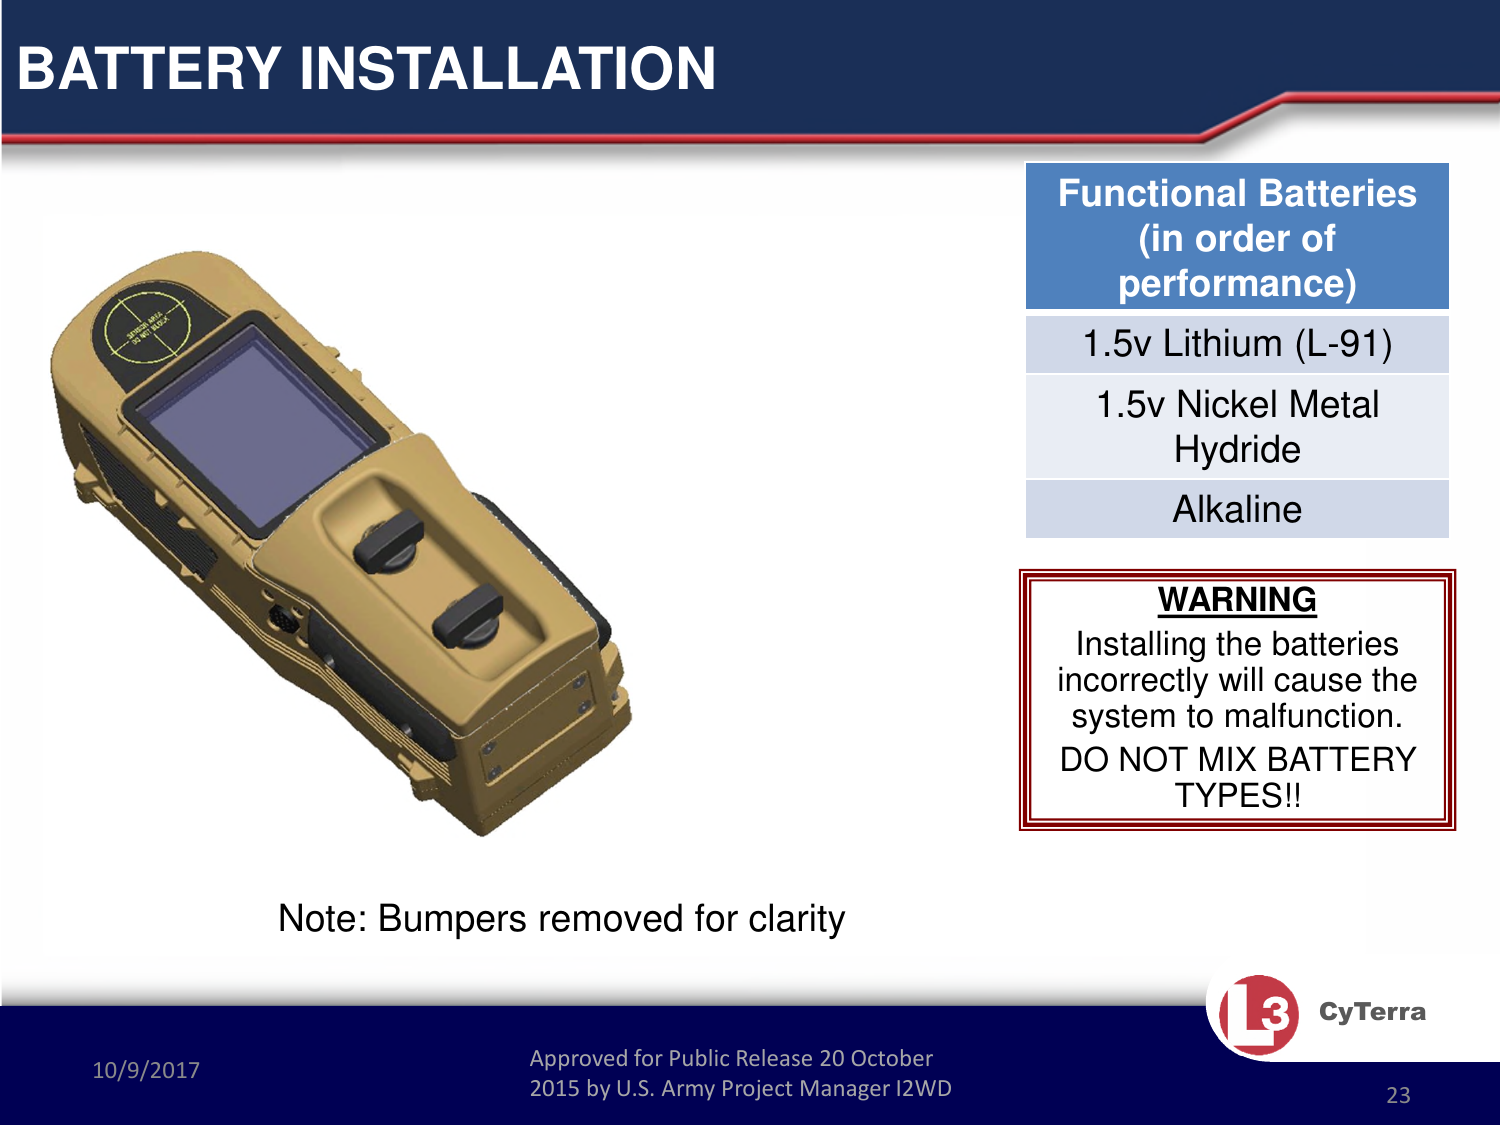 Approved for Public Release 20 October 2015 by U.S. Army Project Manager I2WD10/9/2017 Approved for Public Release 20 October 2015 by U.S. Army Project Manager I2WD 23CyTerraBATTERY INSTALLATIONWARNINGInstalling the batteries incorrectly will cause the system to malfunction.DO NOT MIX BATTERY TYPES!!Functional Batteries(in order of performance)1.5v Lithium (L-91)1.5v Nickel MetalHydride AlkalineNote: Bumpers removed for clarity